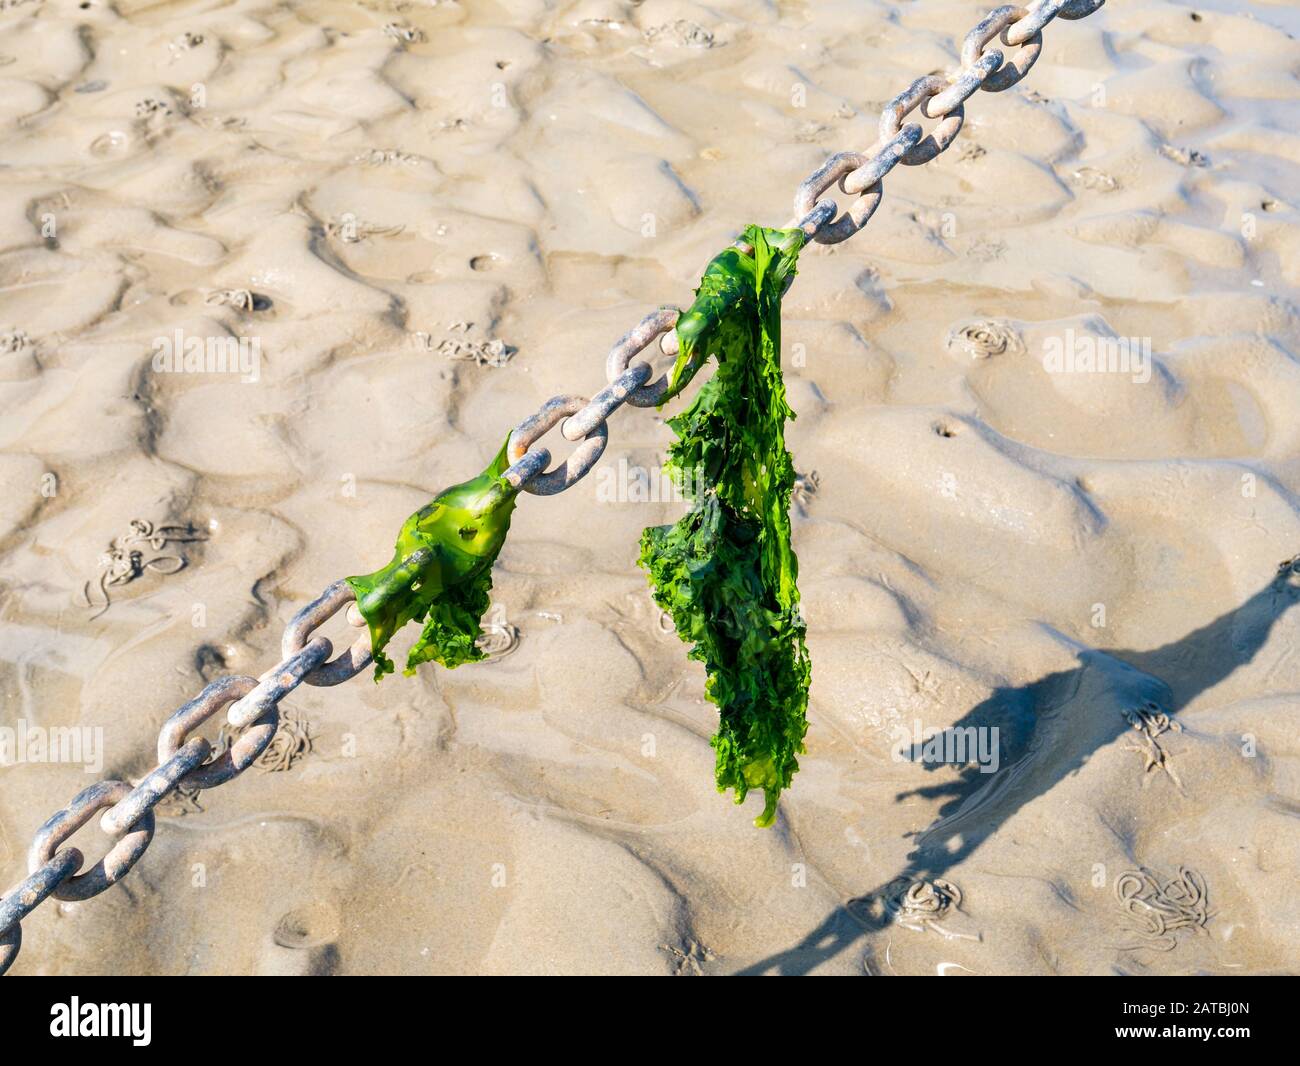 Sea lettuce leaves hanging on anchor chain on sand flat at low tide, Waddensea, Netherlands Stock Photo